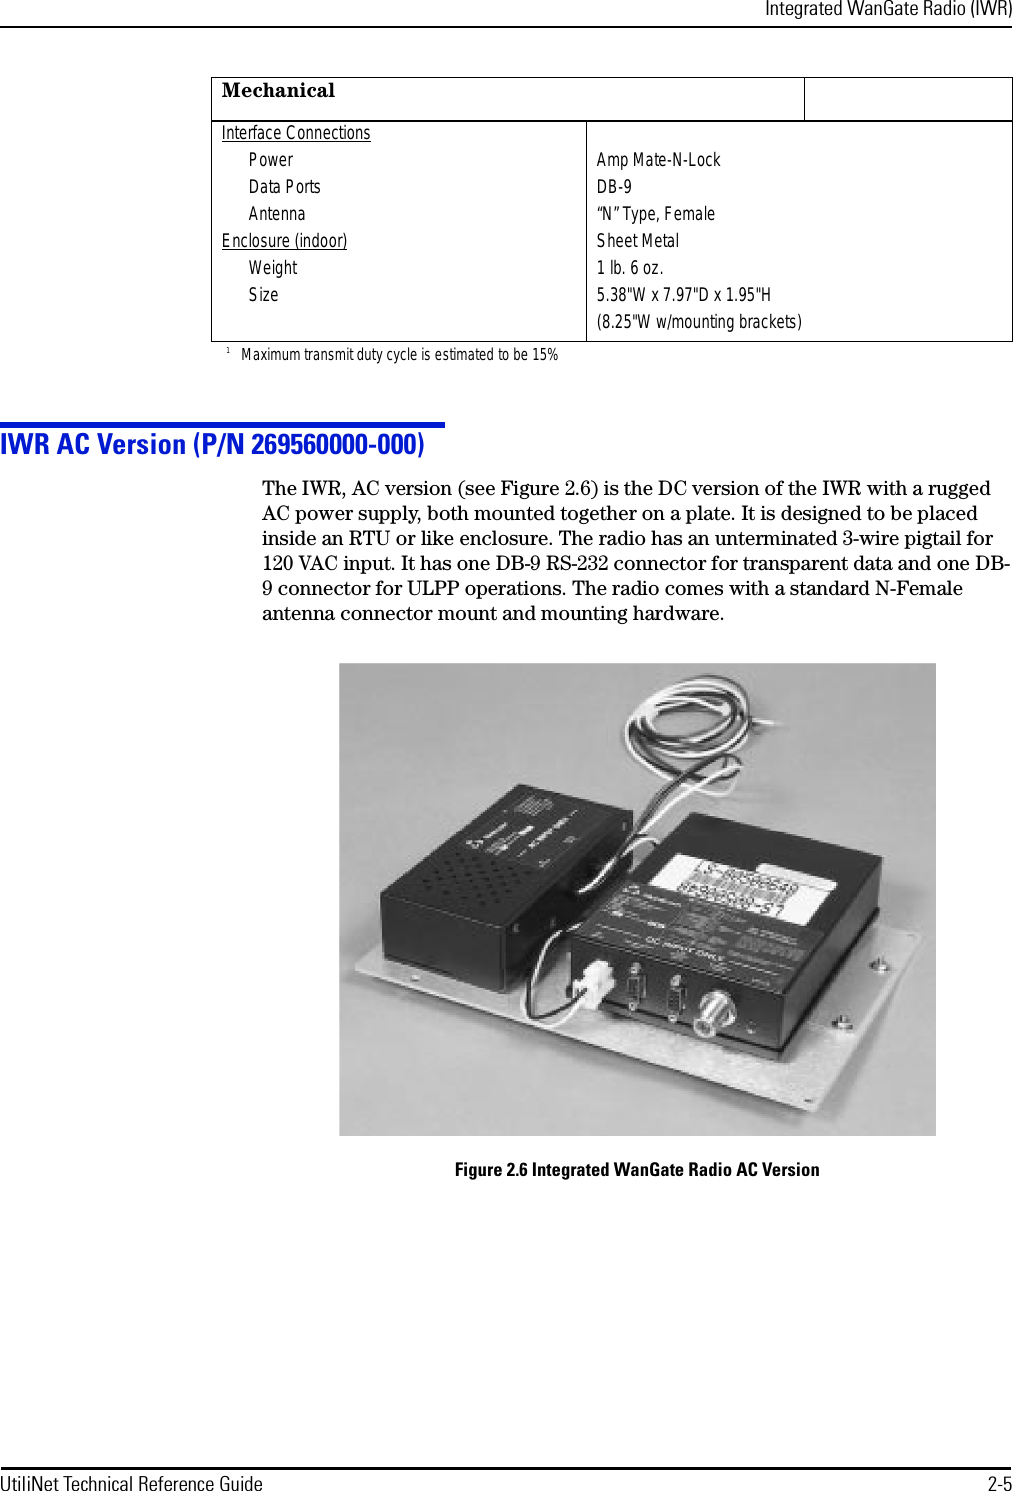 Integrated WanGate Radio (IWR)UtiliNet Technical Reference Guide 2-5IWR AC Version (P/N 269560000-000)The IWR, AC version (see Figure 2.6) is the DC version of the IWR with a rugged AC power supply, both mounted together on a plate. It is designed to be placed inside an RTU or like enclosure. The radio has an unterminated 3-wire pigtail for 120 VAC input. It has one DB-9 RS-232 connector for transparent data and one DB-9 connector for ULPP operations. The radio comes with a standard N-Female antenna connector mount and mounting hardware.Figure 2.6 Integrated WanGate Radio AC VersionMechanicalInterface ConnectionsPower Data PortsAntennaEnclosure (indoor)Weight SizeAmp Mate-N-LockDB-9“N” Type, FemaleSheet Metal1 lb. 6 oz.5.38&quot;W x 7.97&quot;D x 1.95&quot;H(8.25&quot;W w/mounting brackets)1Maximum transmit duty cycle is estimated to be 15%